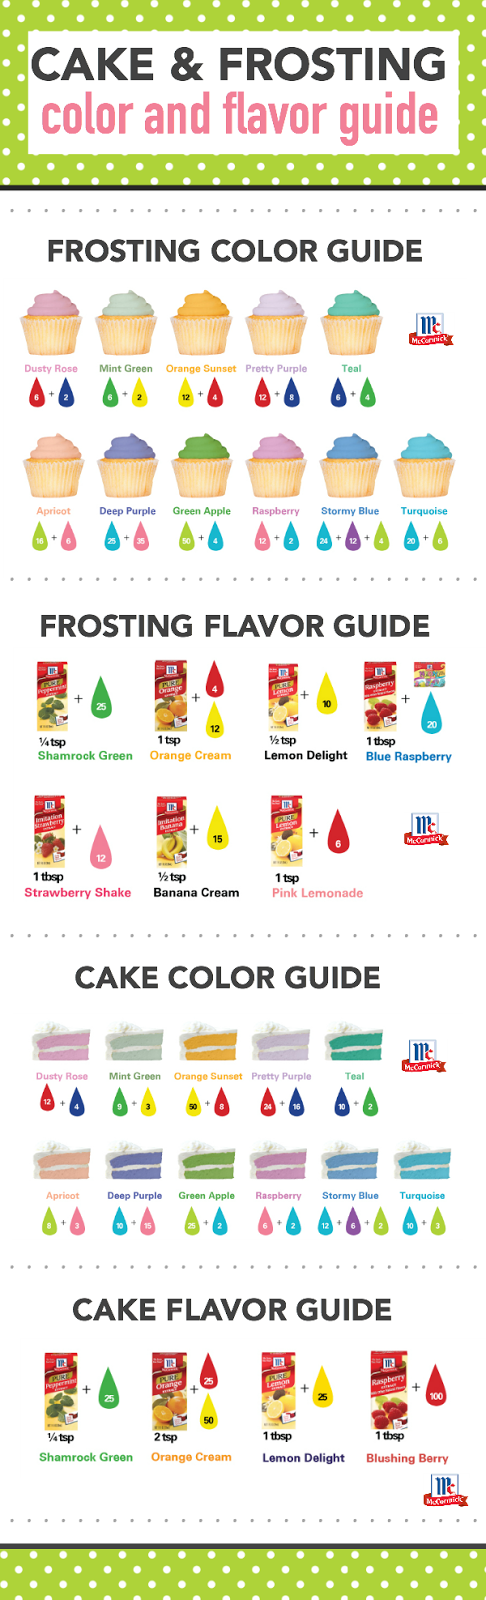 Cake and Frosting coloring and flavoring guide ♥